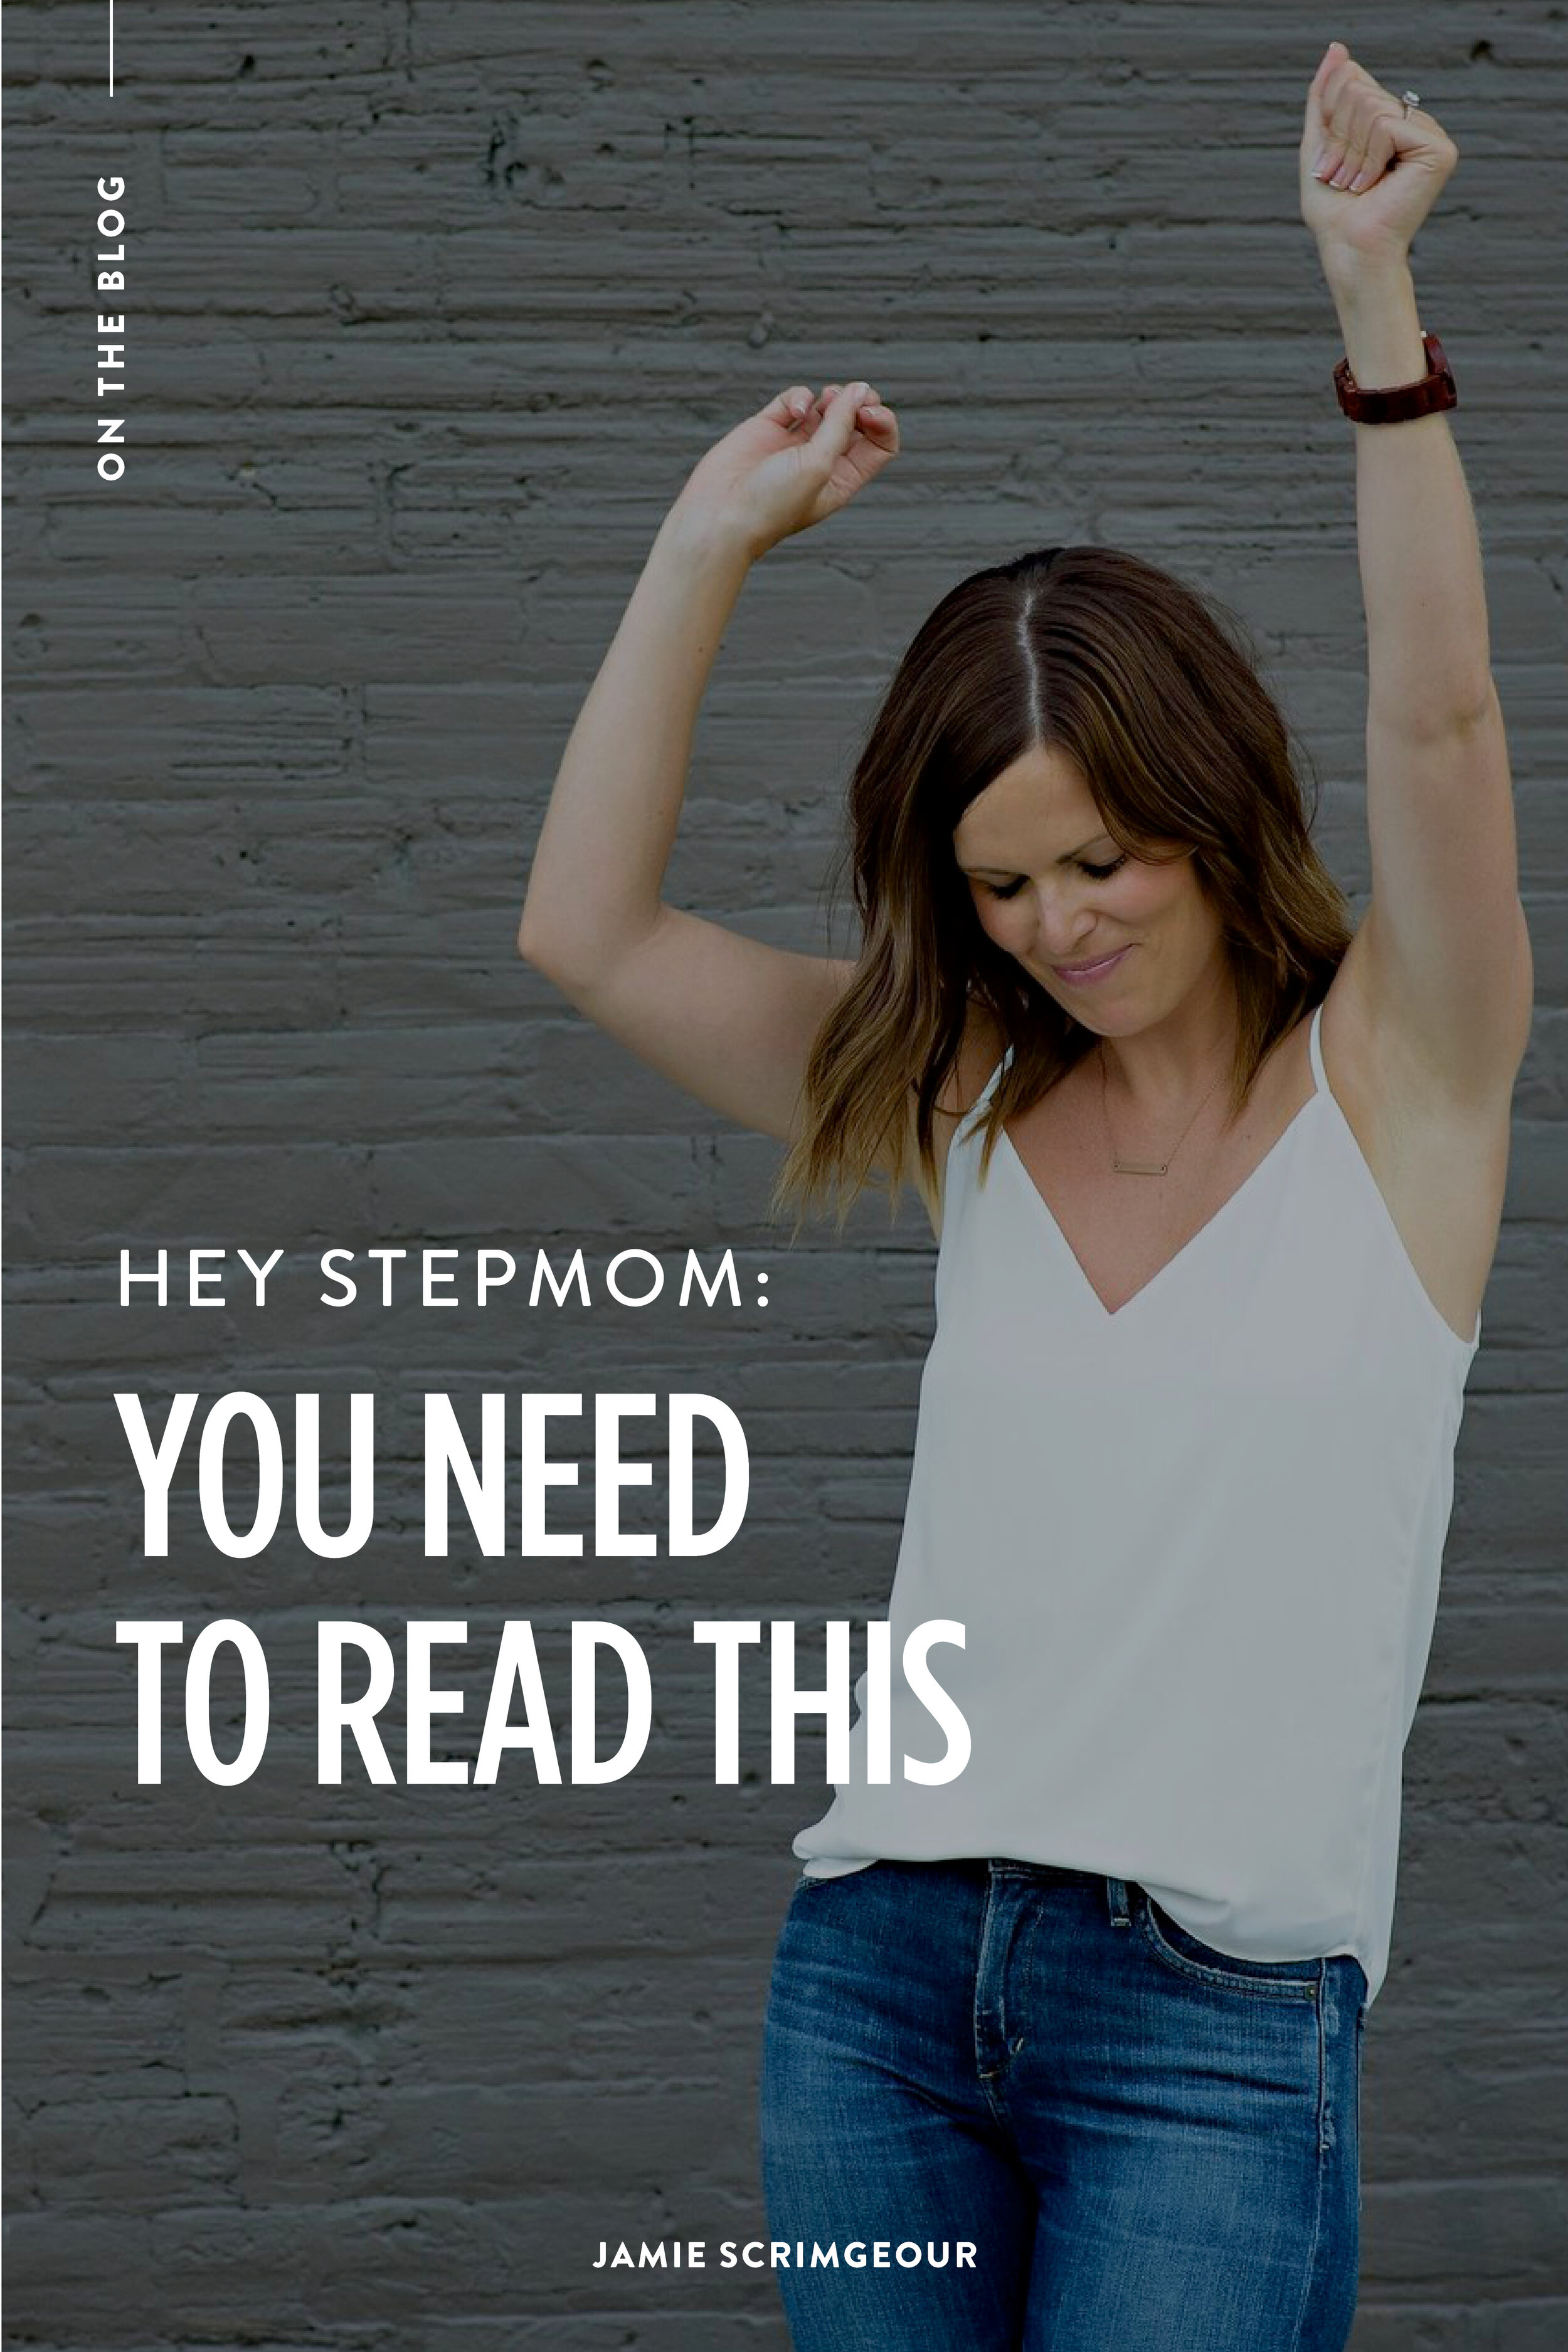 Jamie Scrimgeour Blog - Hey Stepmom, You Need To Read This